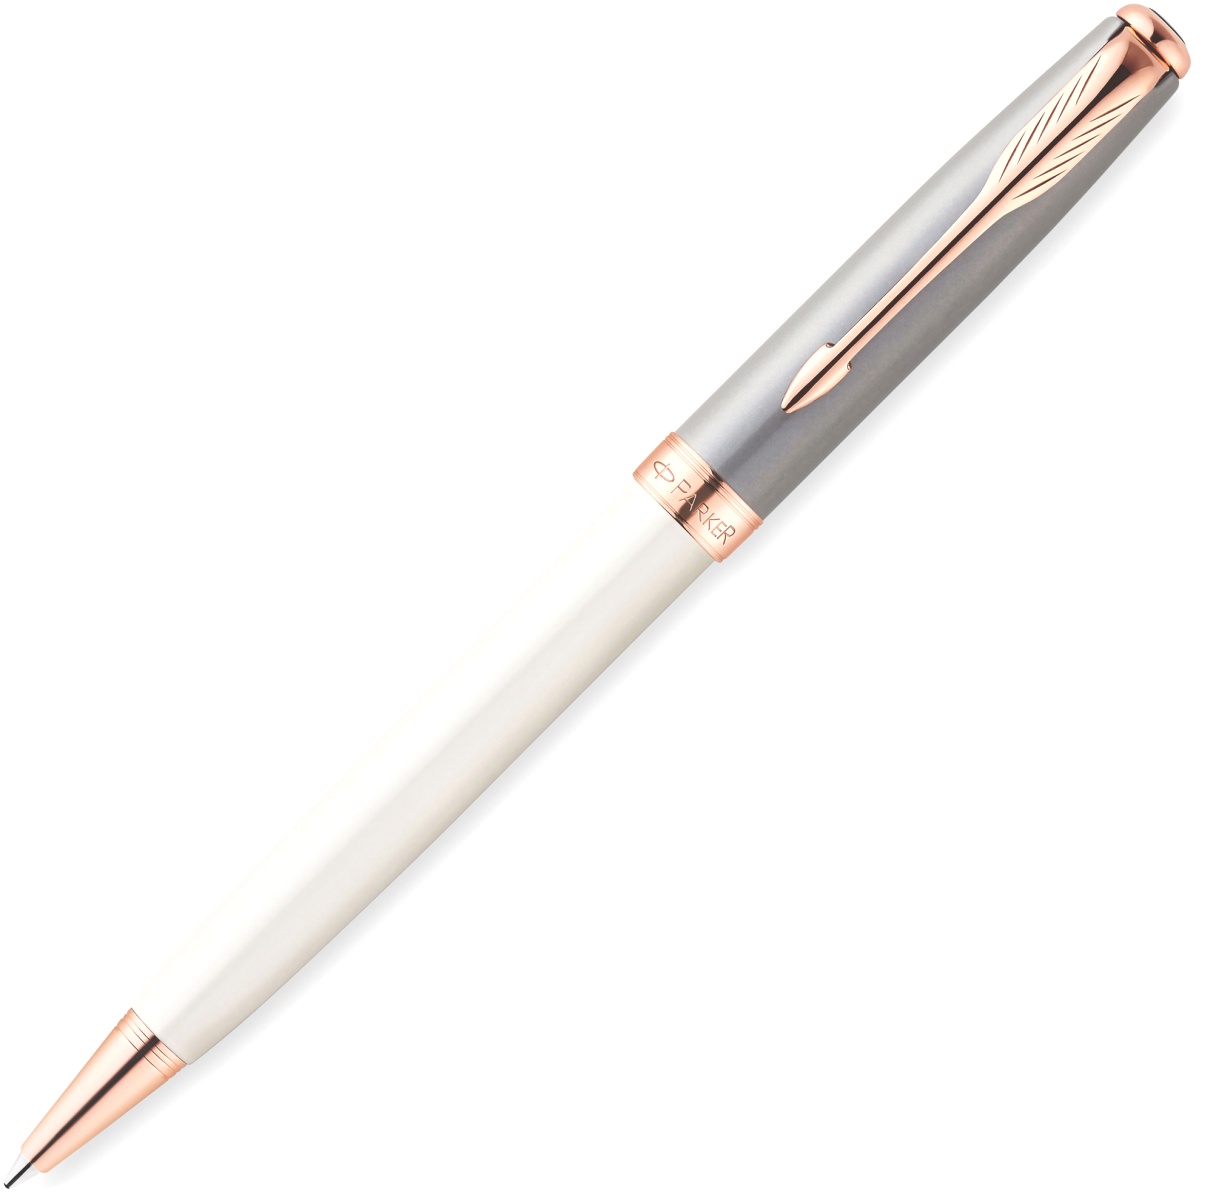 Шариковая ручка Parker Sonnet K533 Special Edition 2015 Subtle, Pearl and Grey